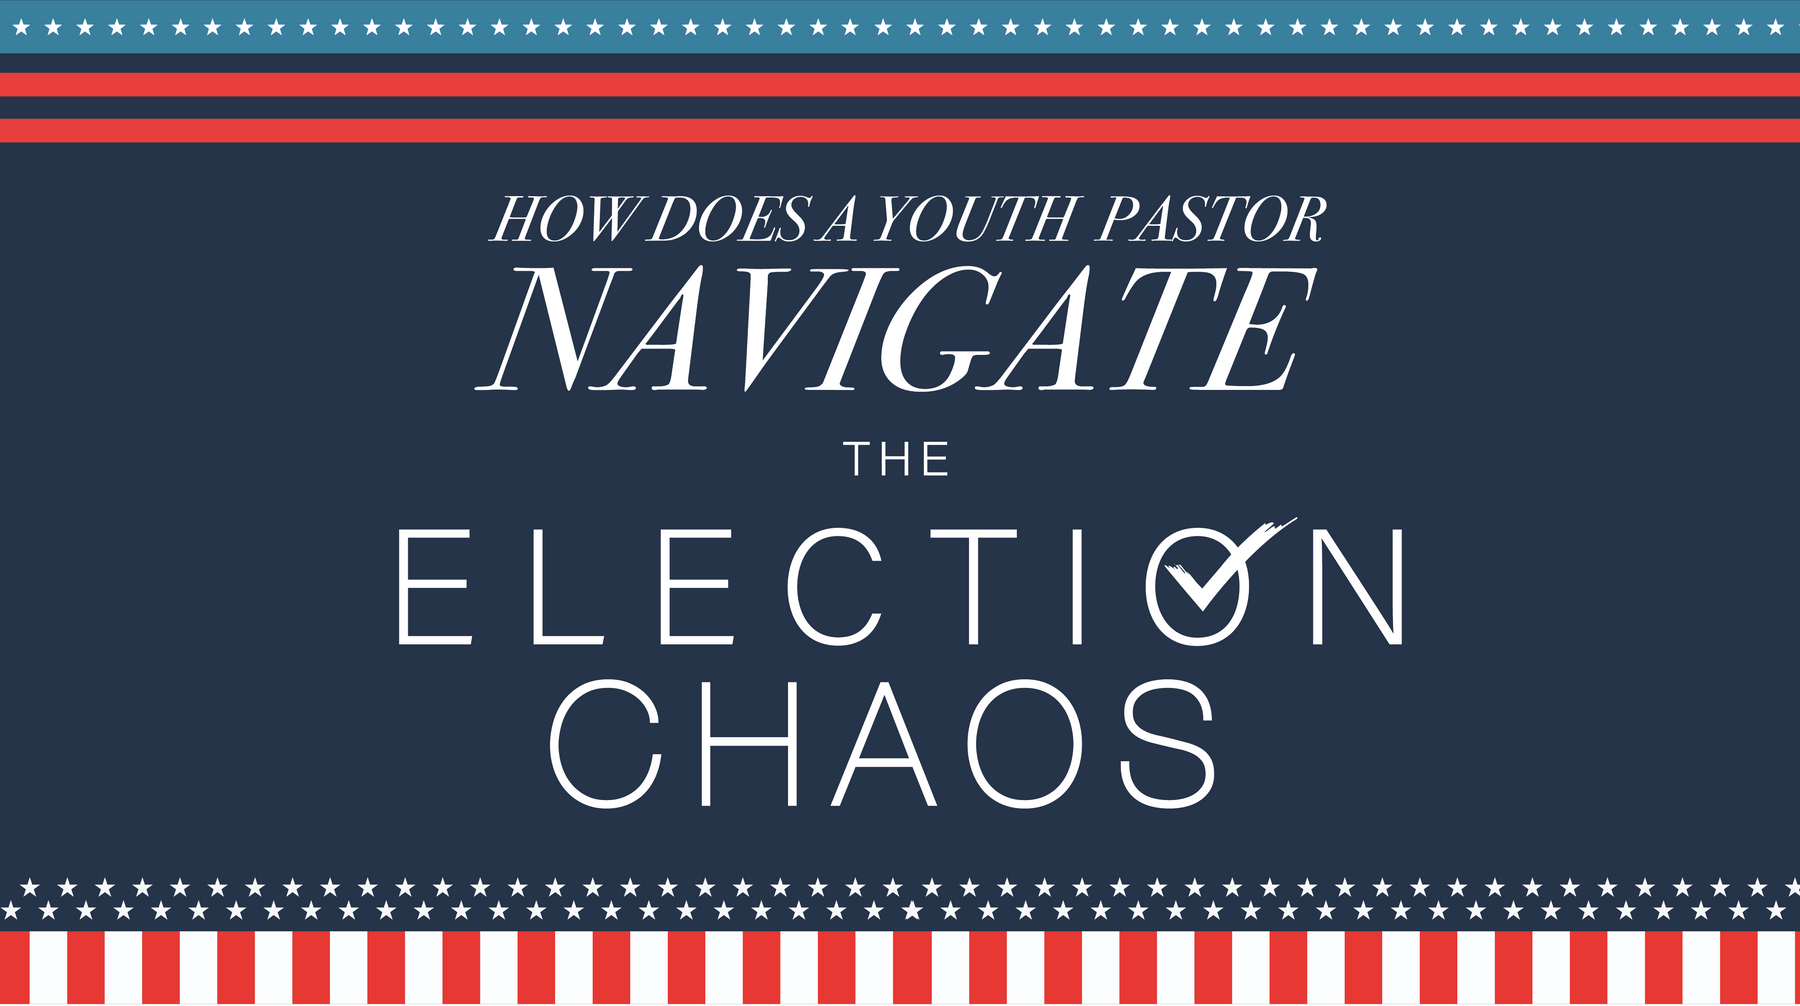 How Does a Youth Pastor Navigate the Election Chaos